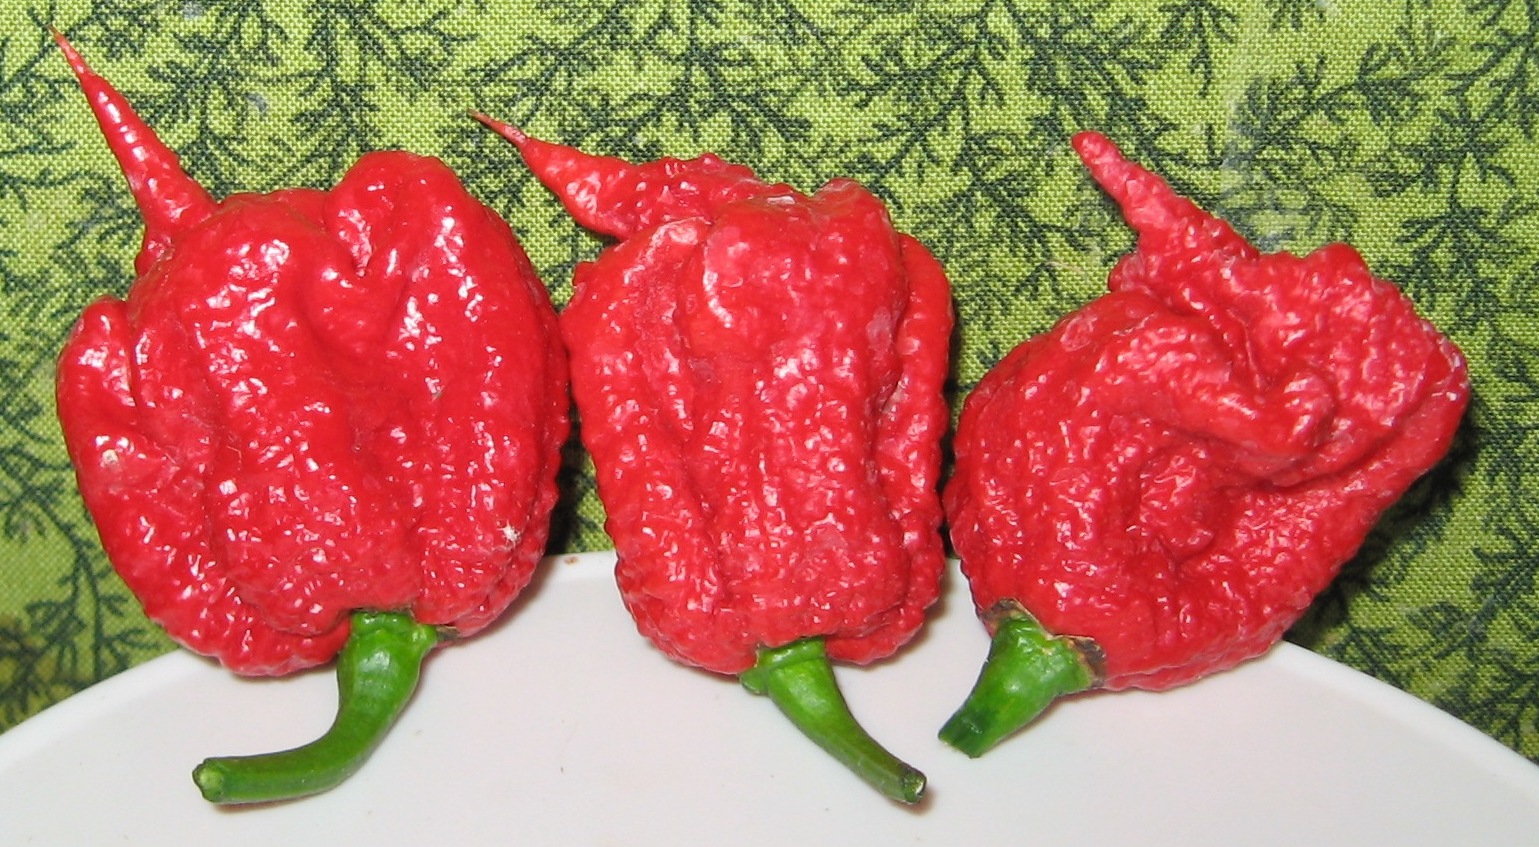 Top 13 Spiciest Peppers in the World, Ranked from Hot to Hottest